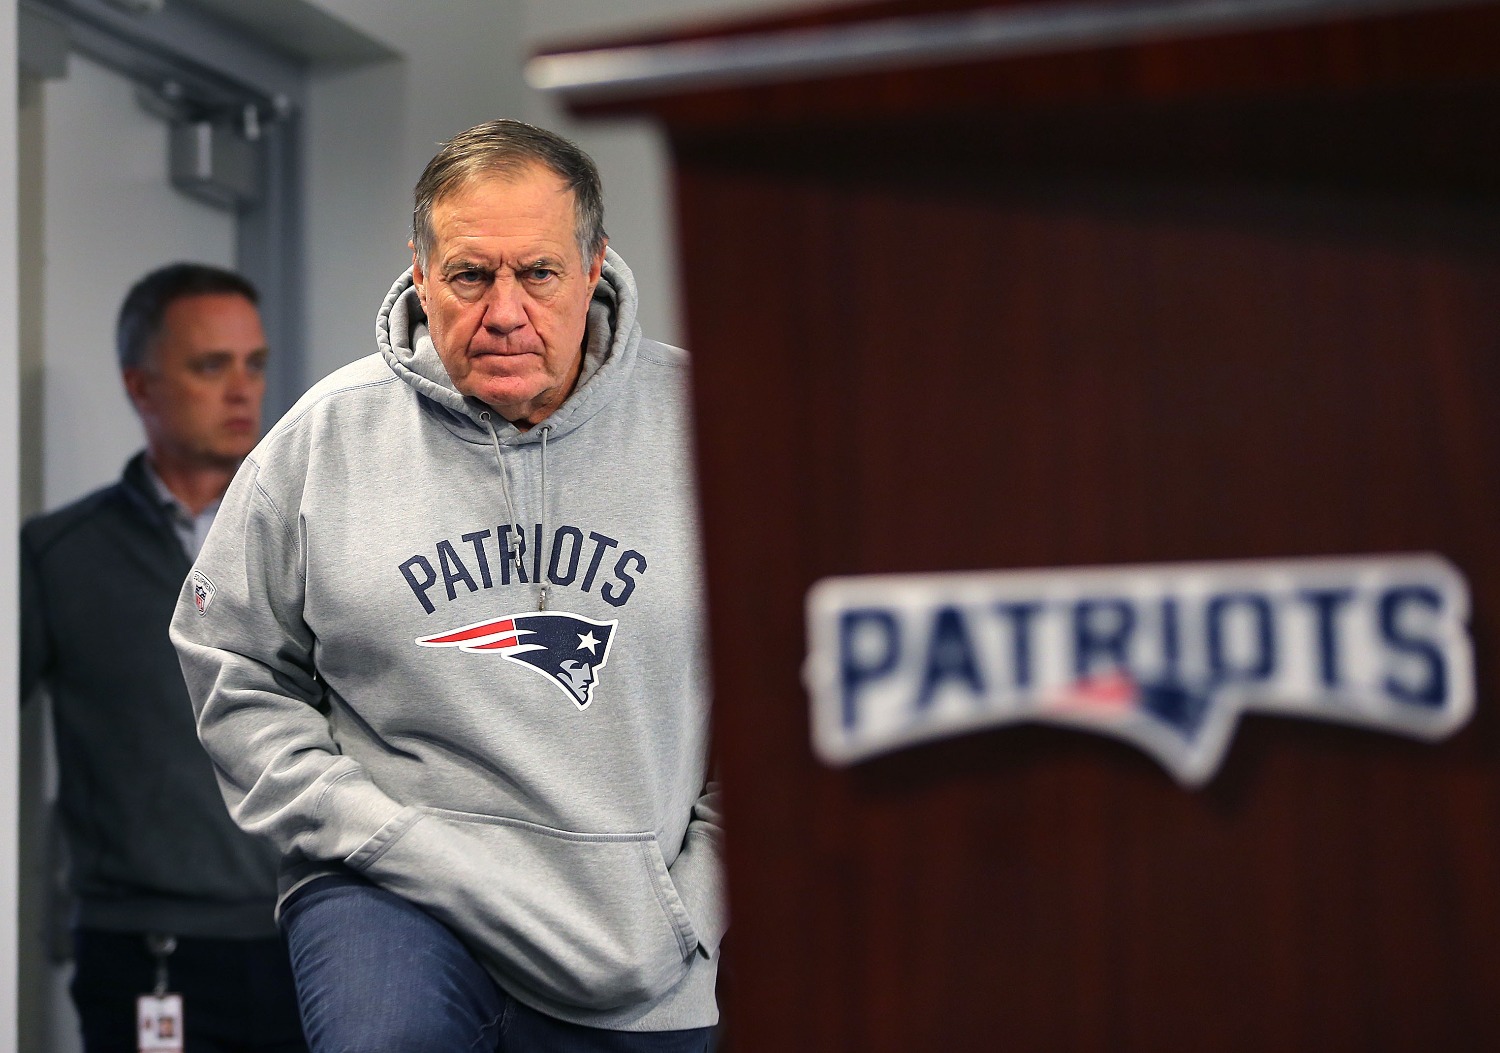 Bill Belichick needs his rookie class to step up, but his comments suggest those first-year Patriots players face a difficult journey just to survive the NFL.